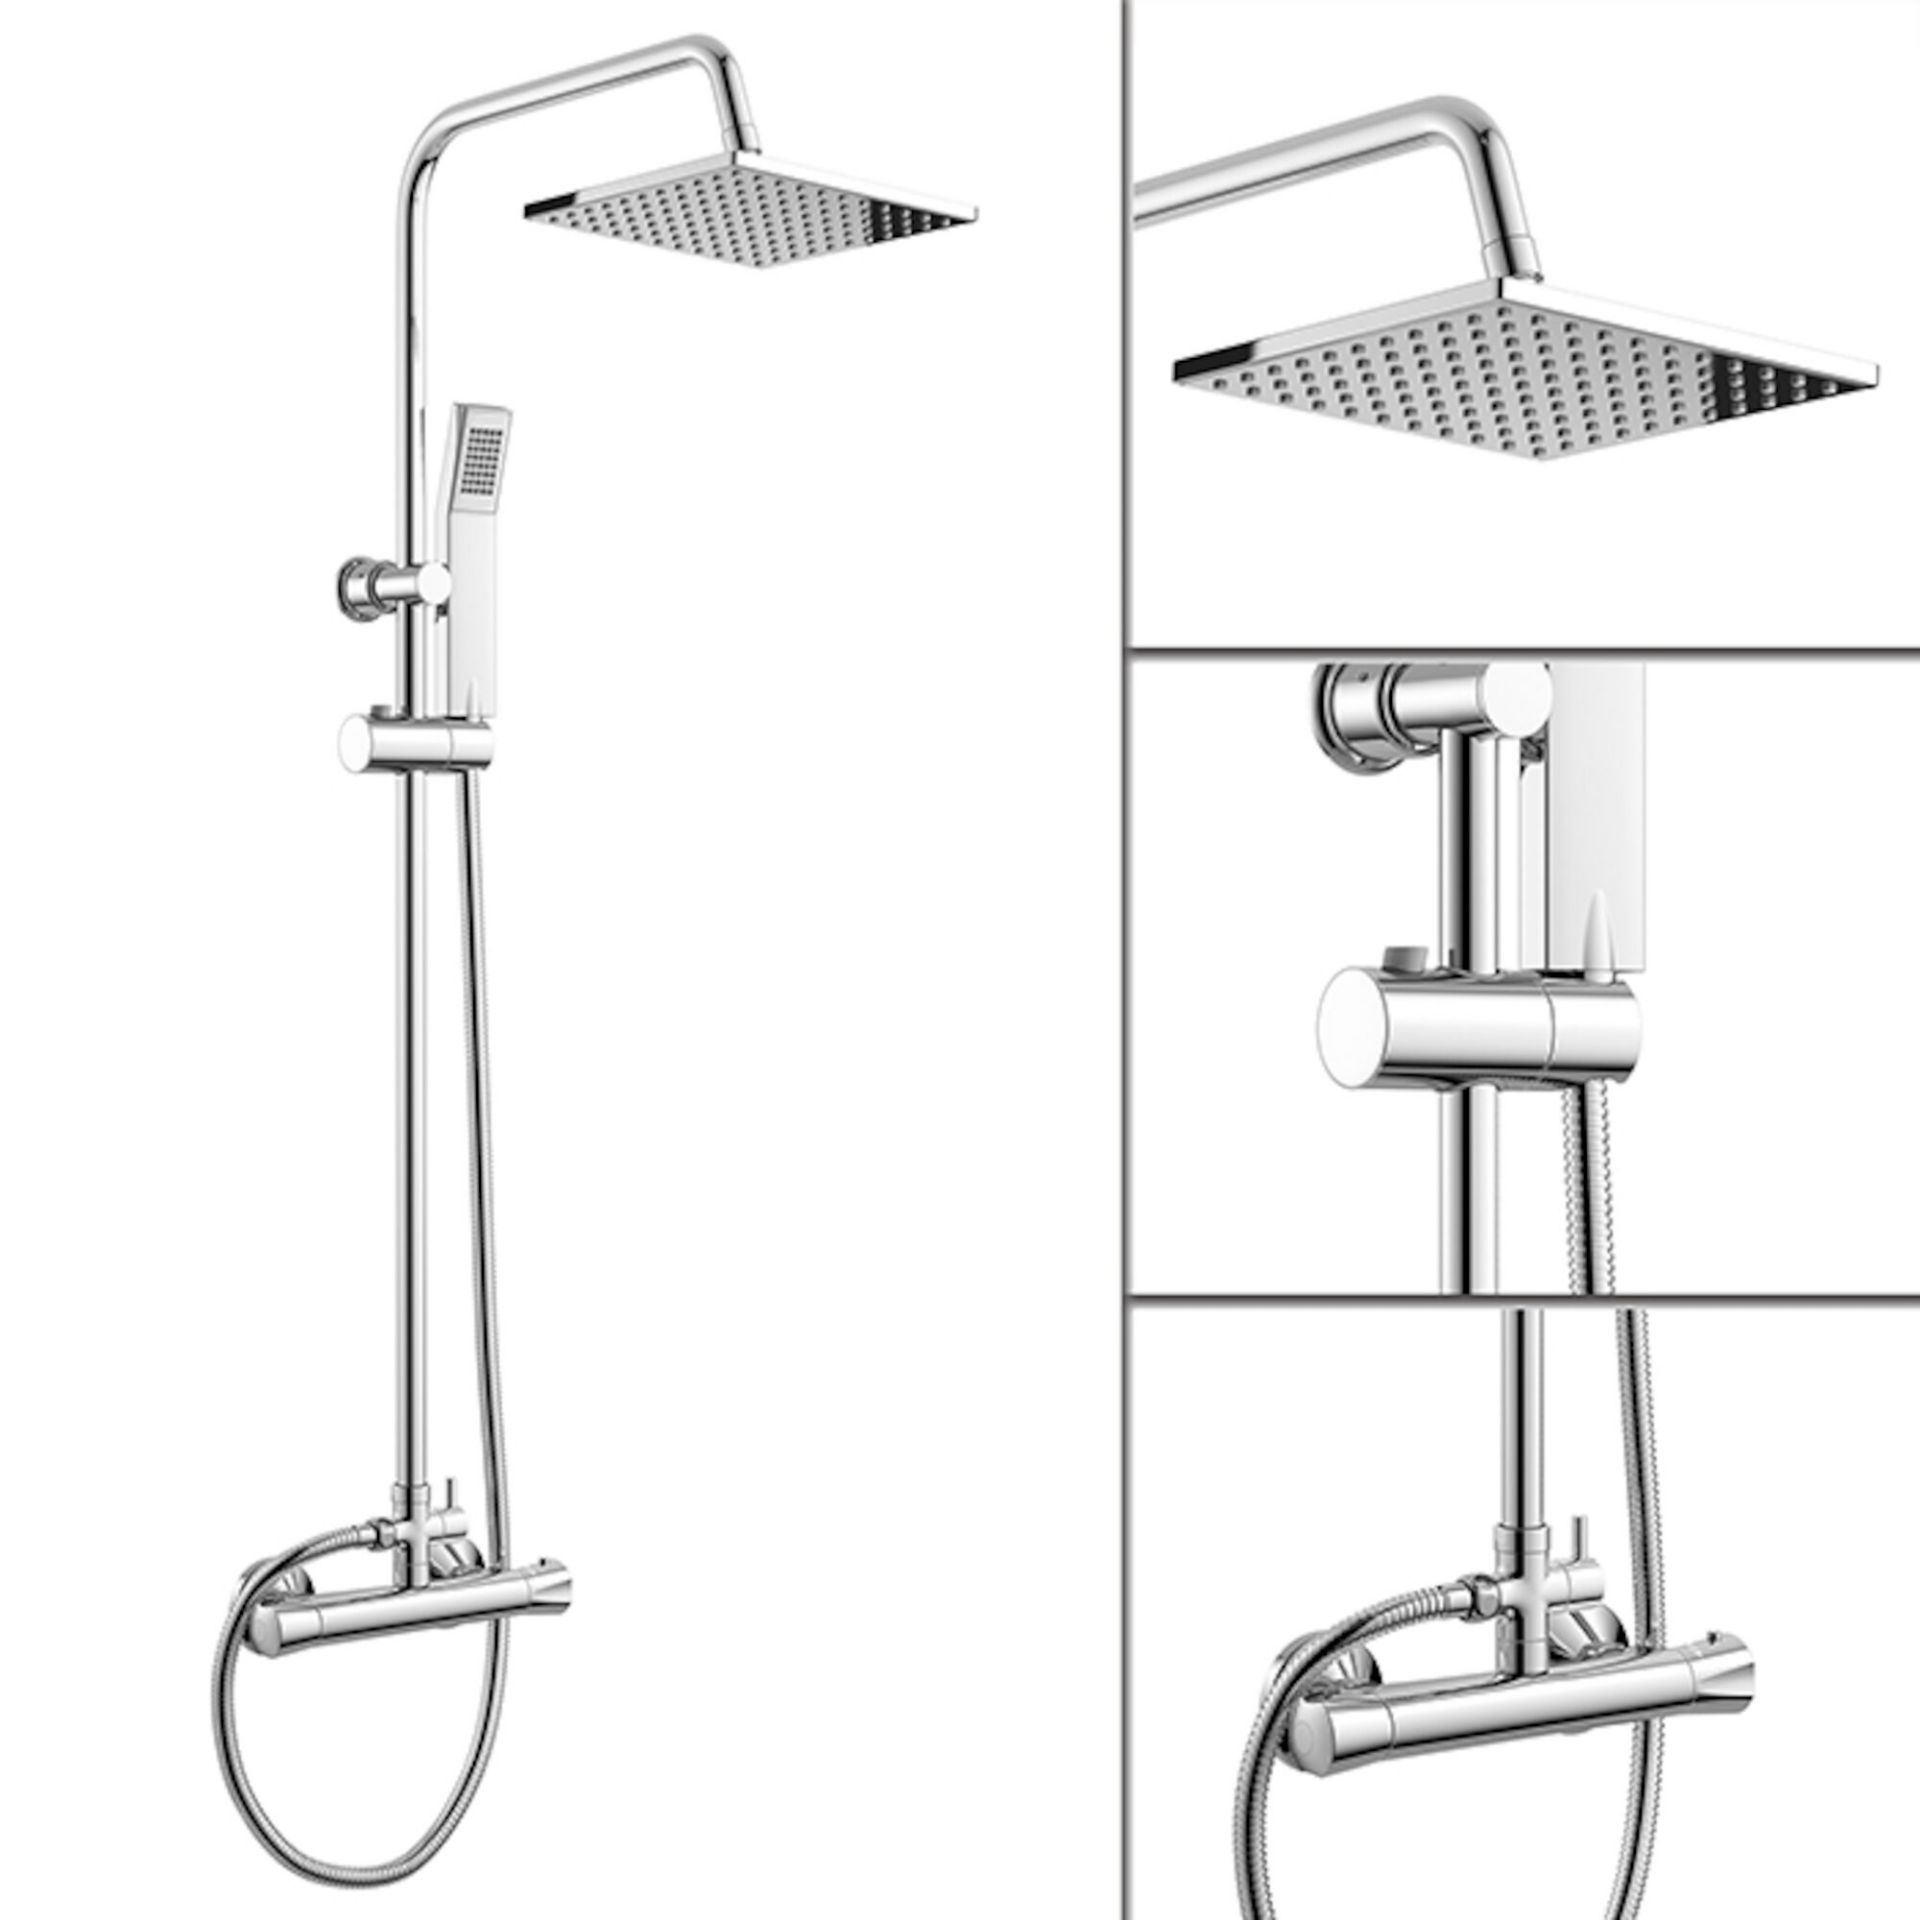 (EY204) Square Exposed Thermostatic Shower Kit & Head. Curved features and contemporary rounded - Image 2 of 2